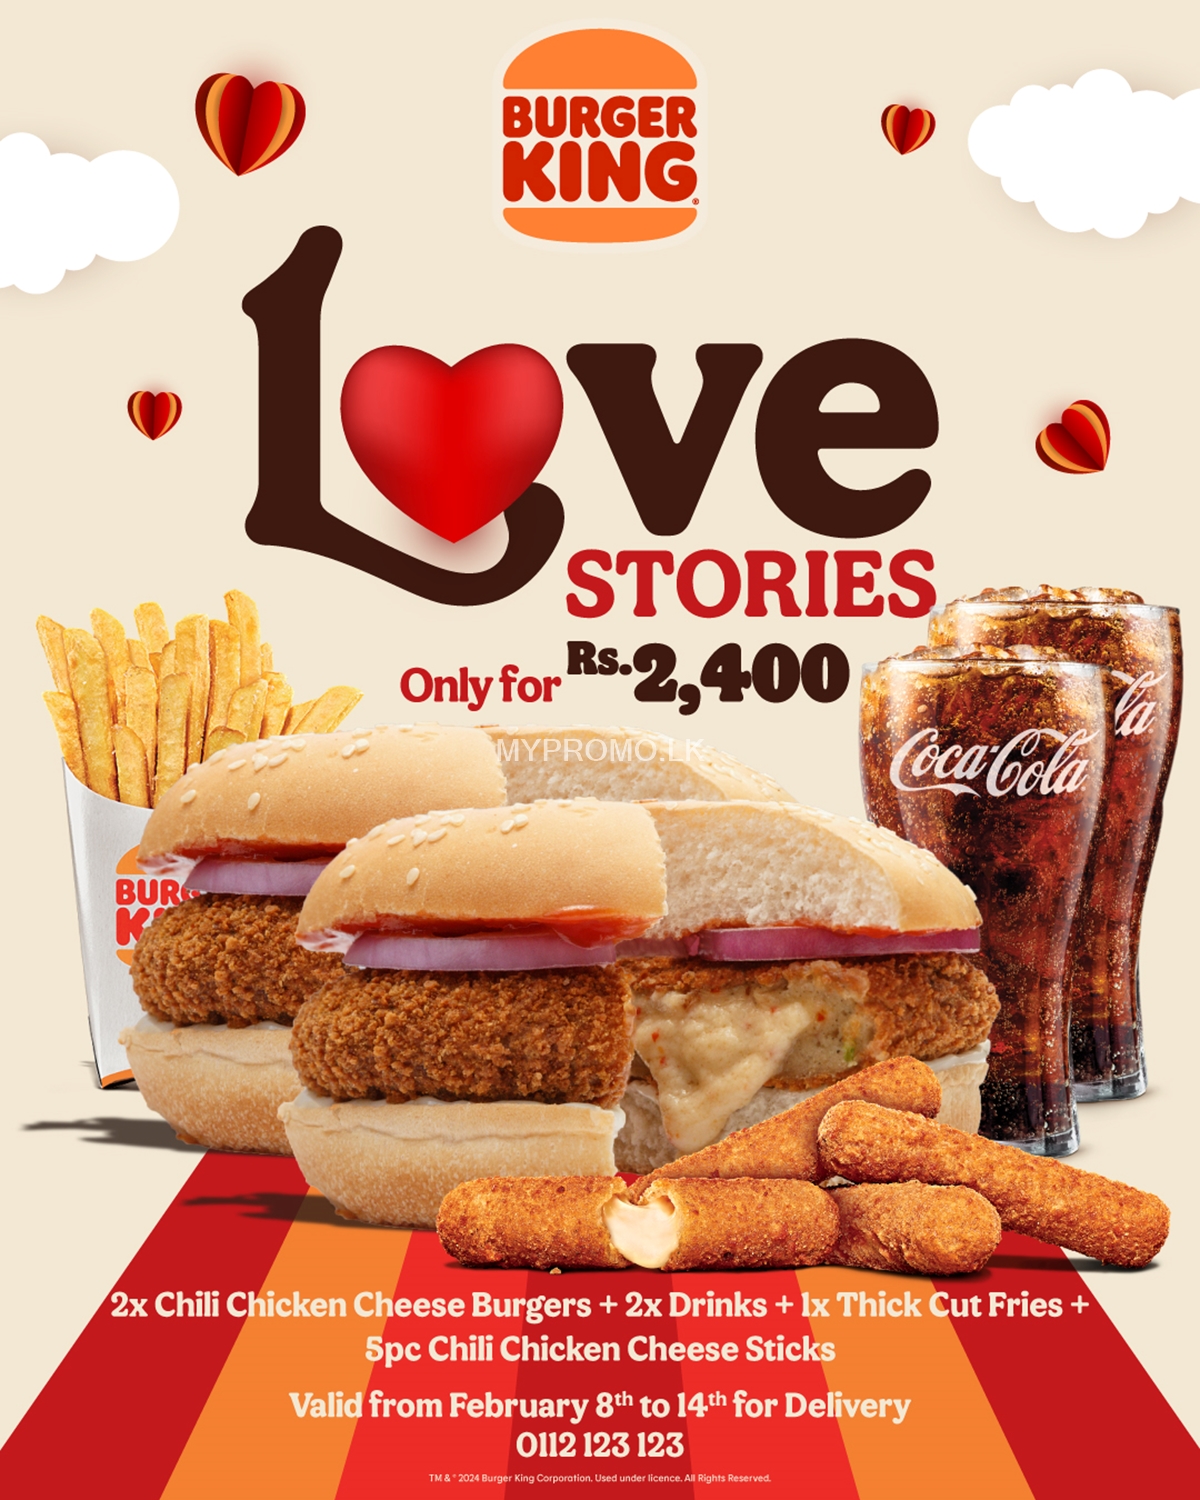 Celebrate LOVE with BURGER KING Love Stories!